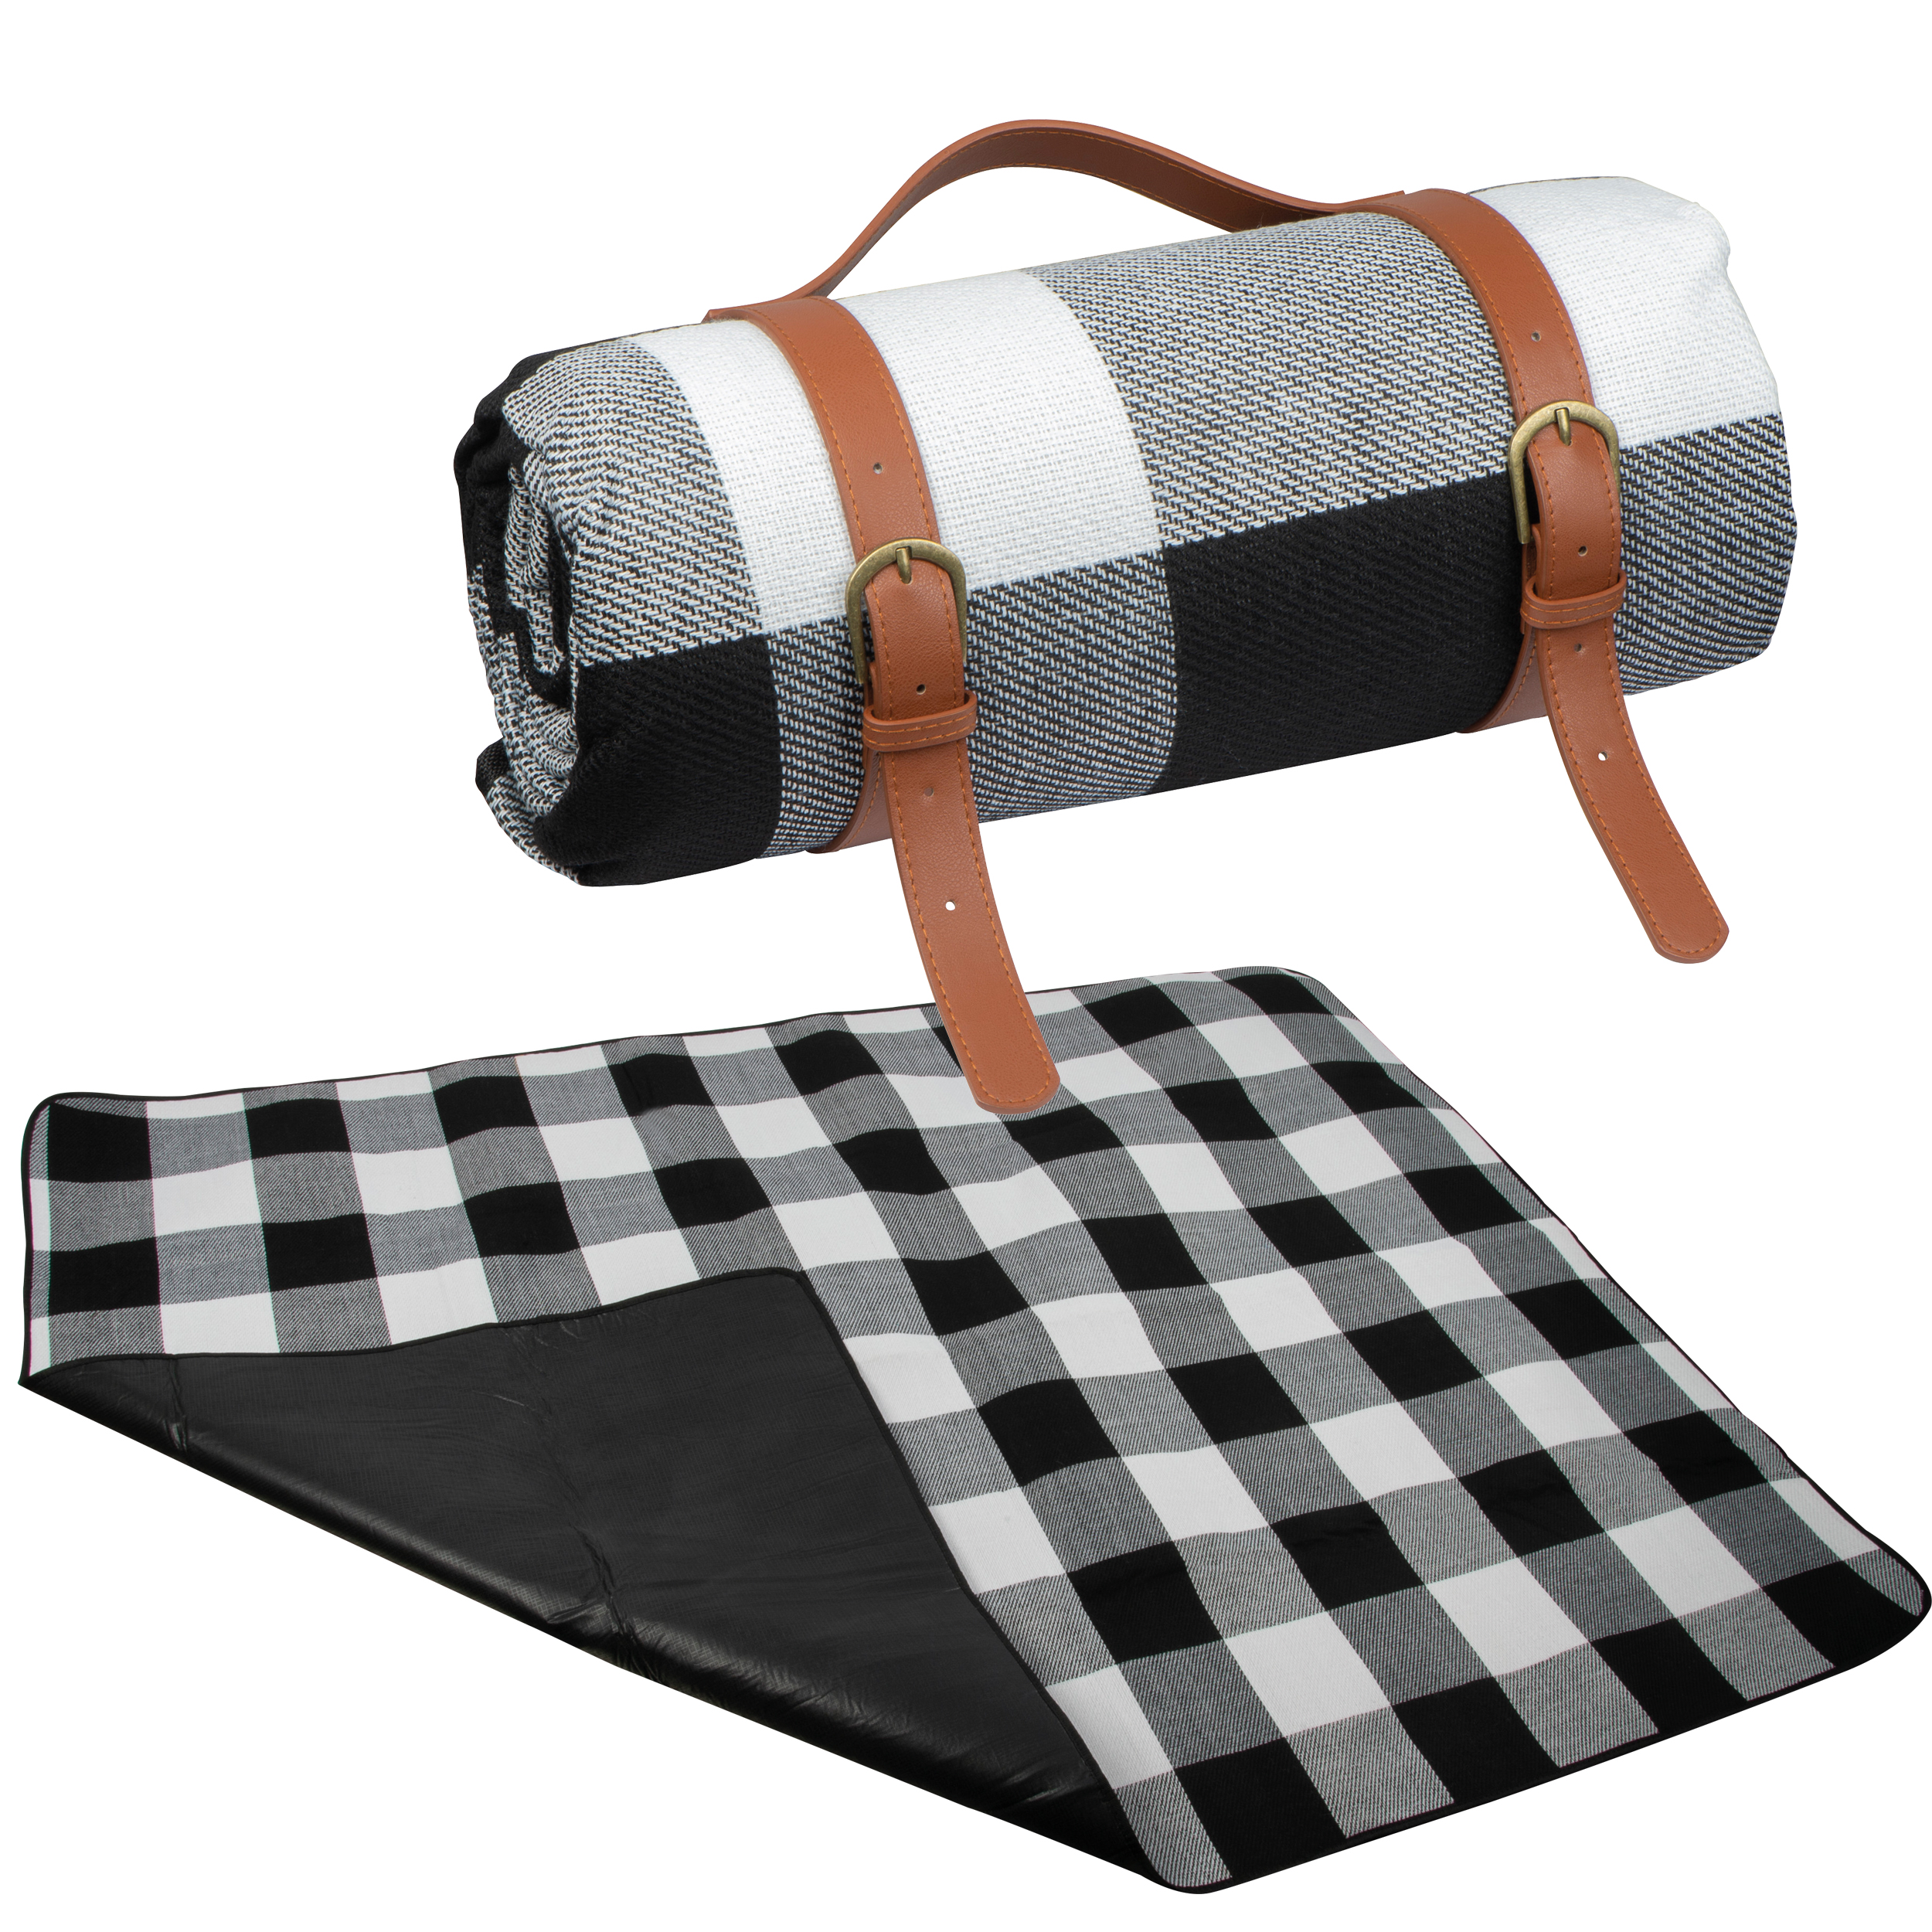 A picnic blanket with a printed logo from Deddington. - Rossendale